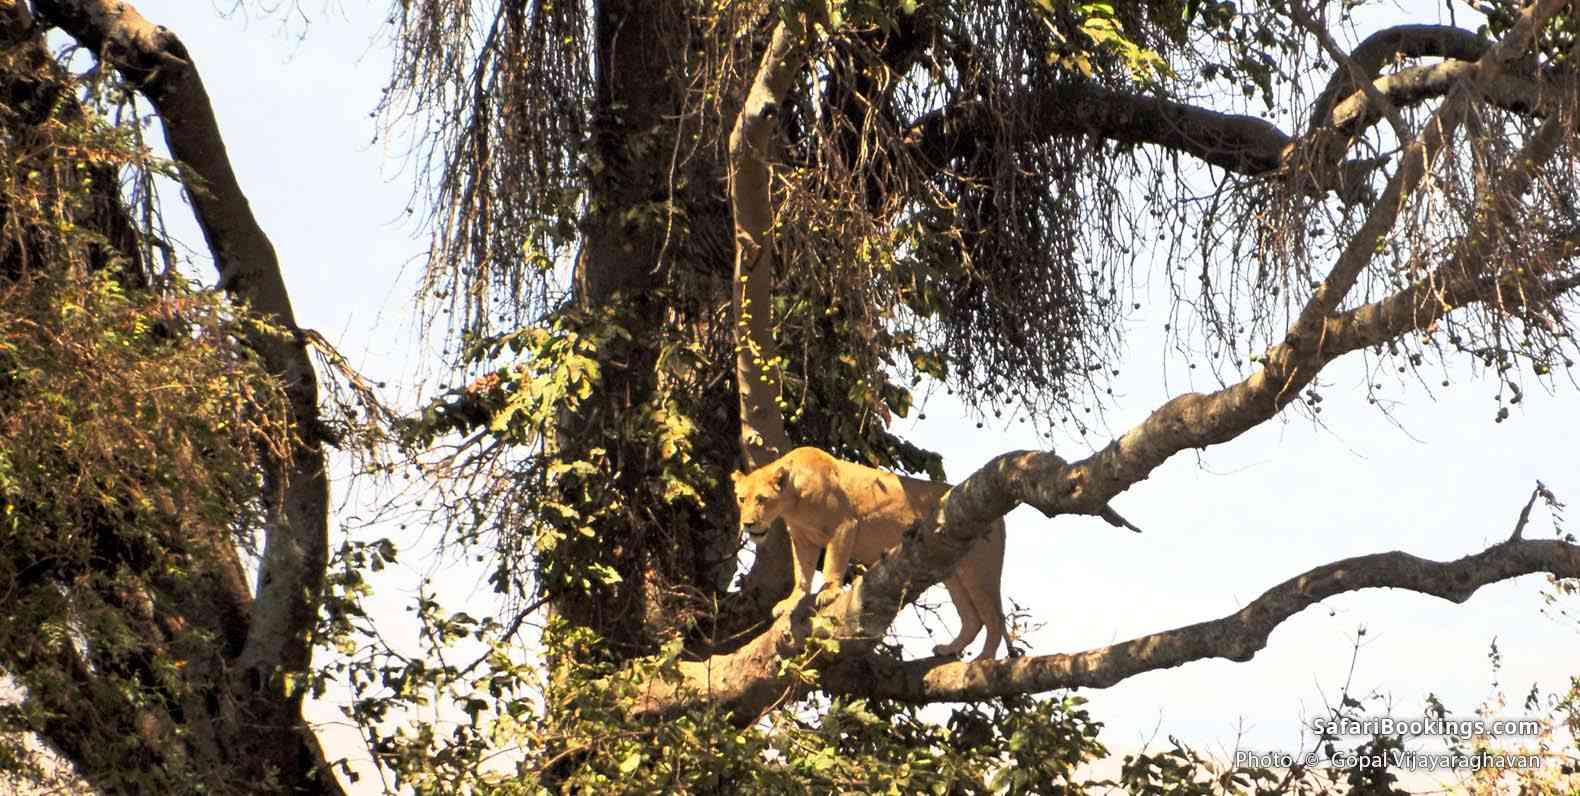 Is that a lion on a tree?